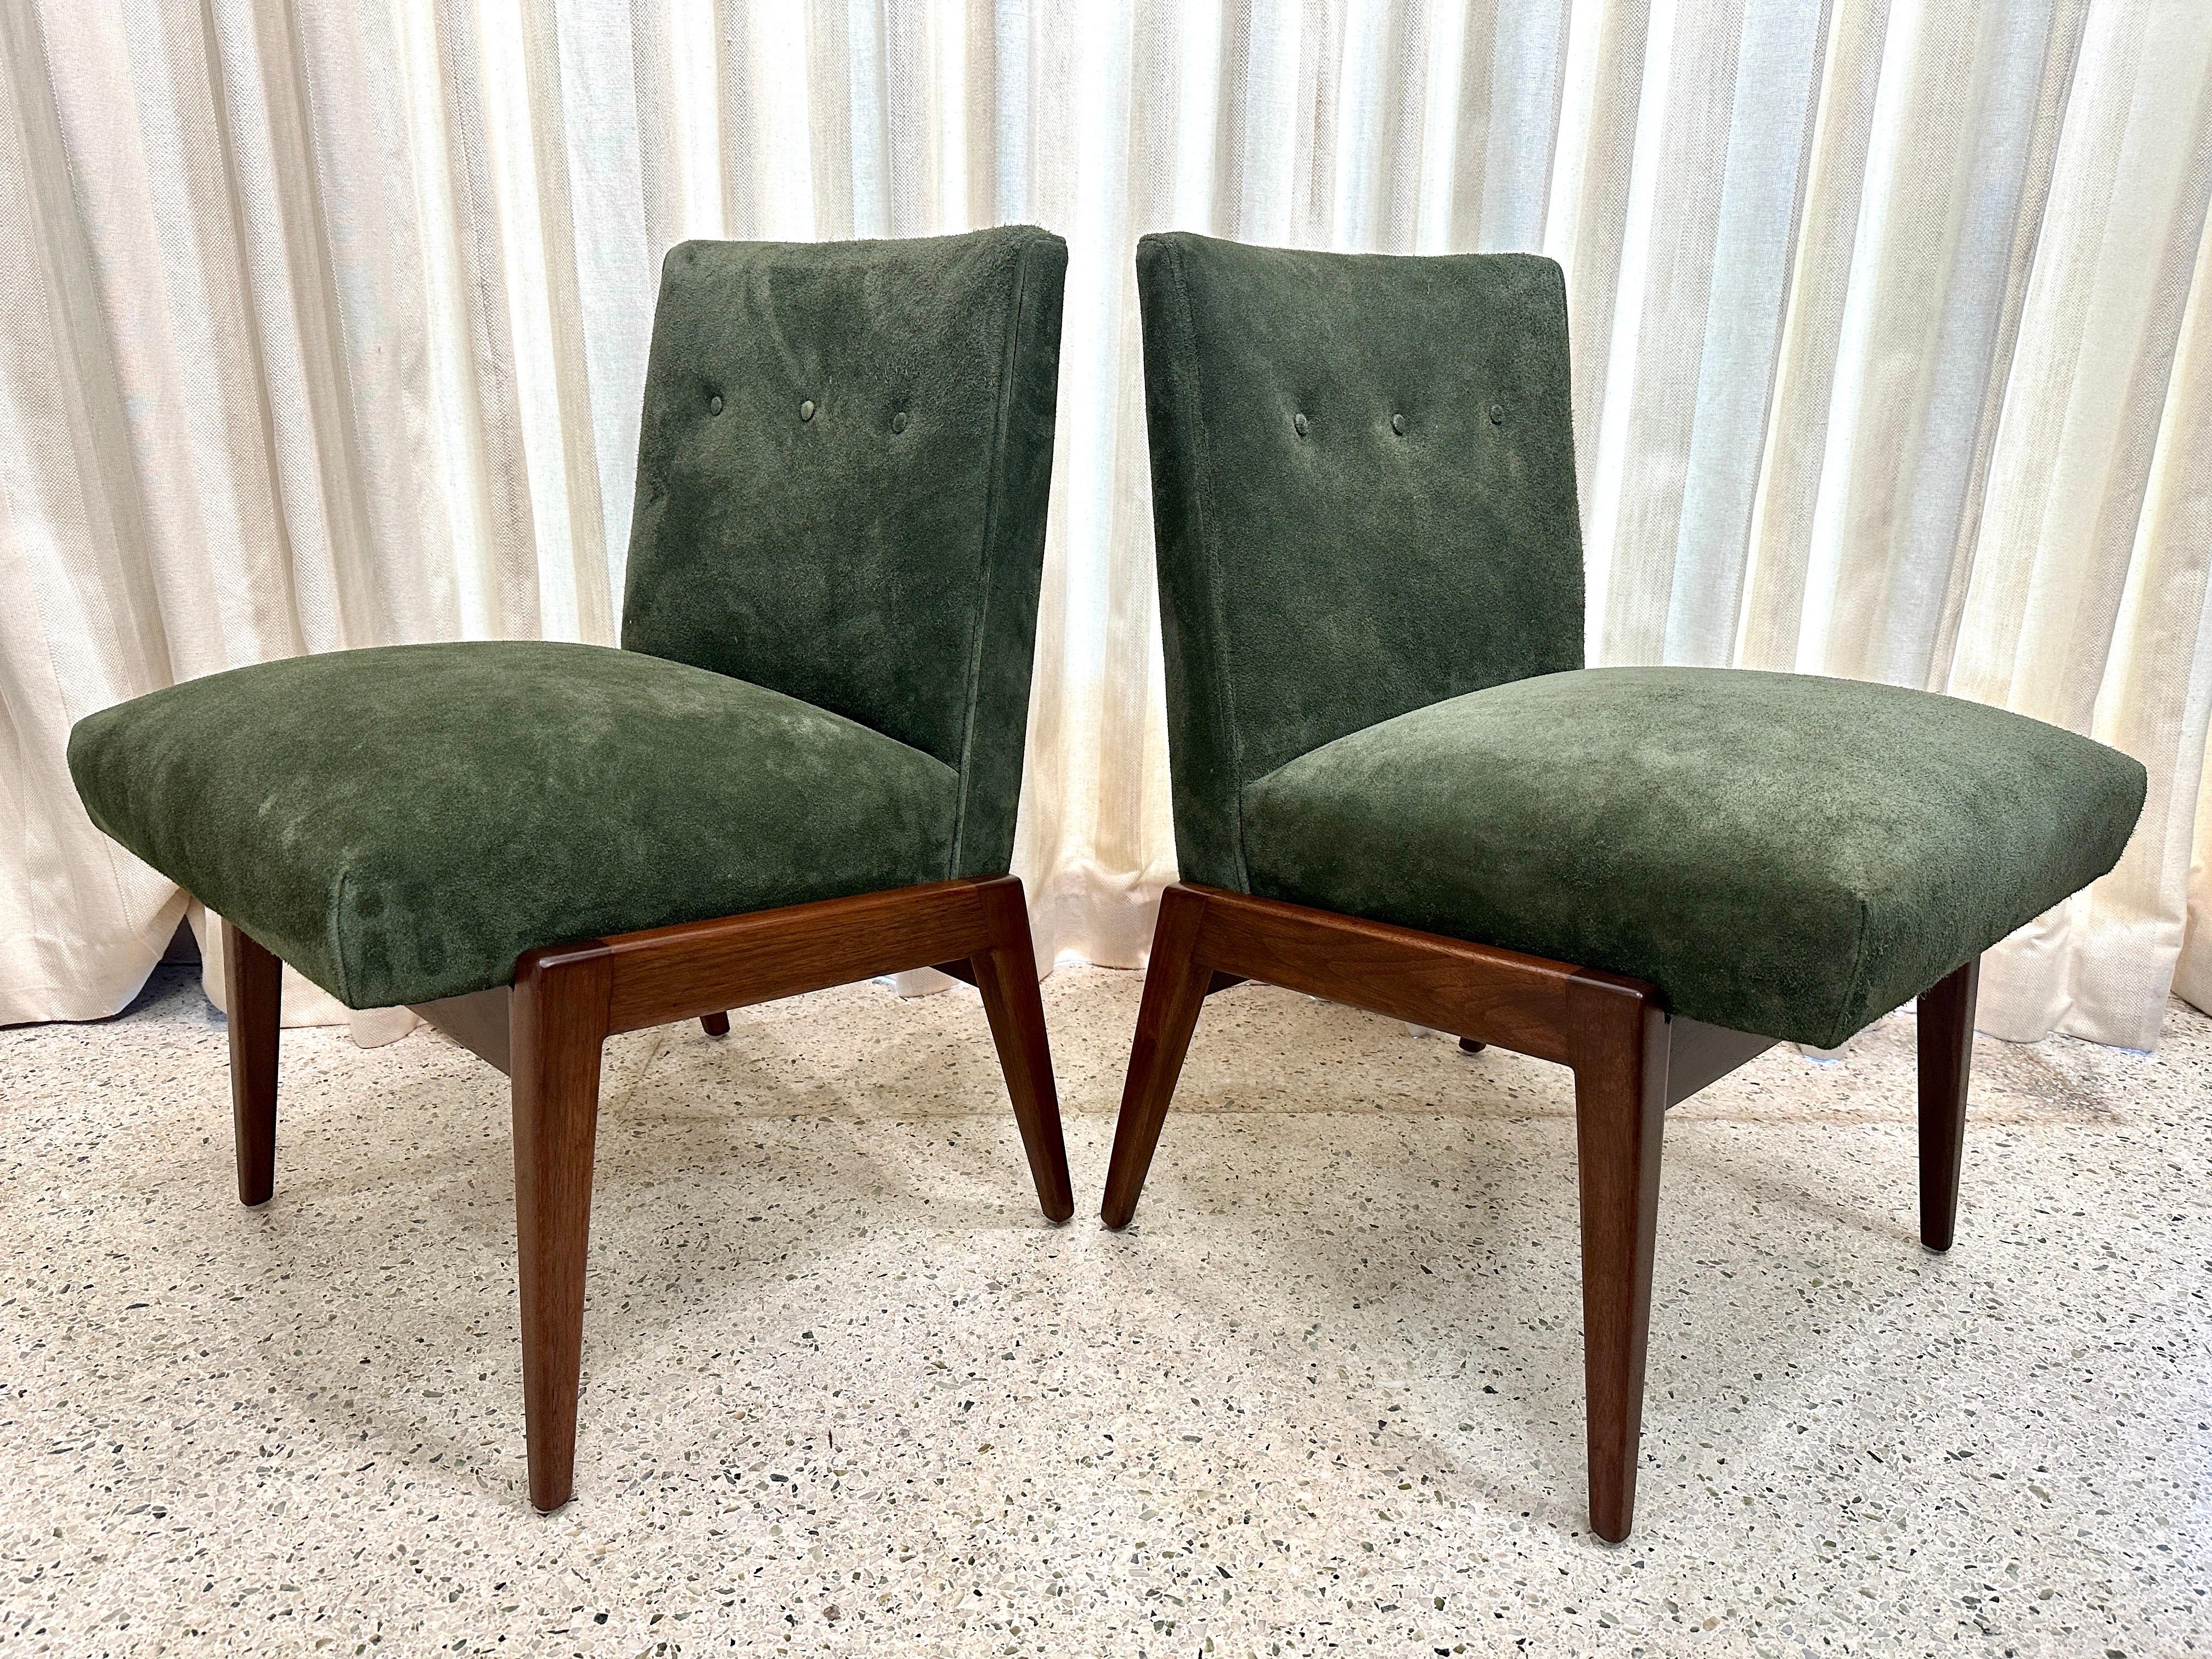 Original Vintage Jens Risom Chairs in Green Suede w/ Label, PAIR For Sale 1